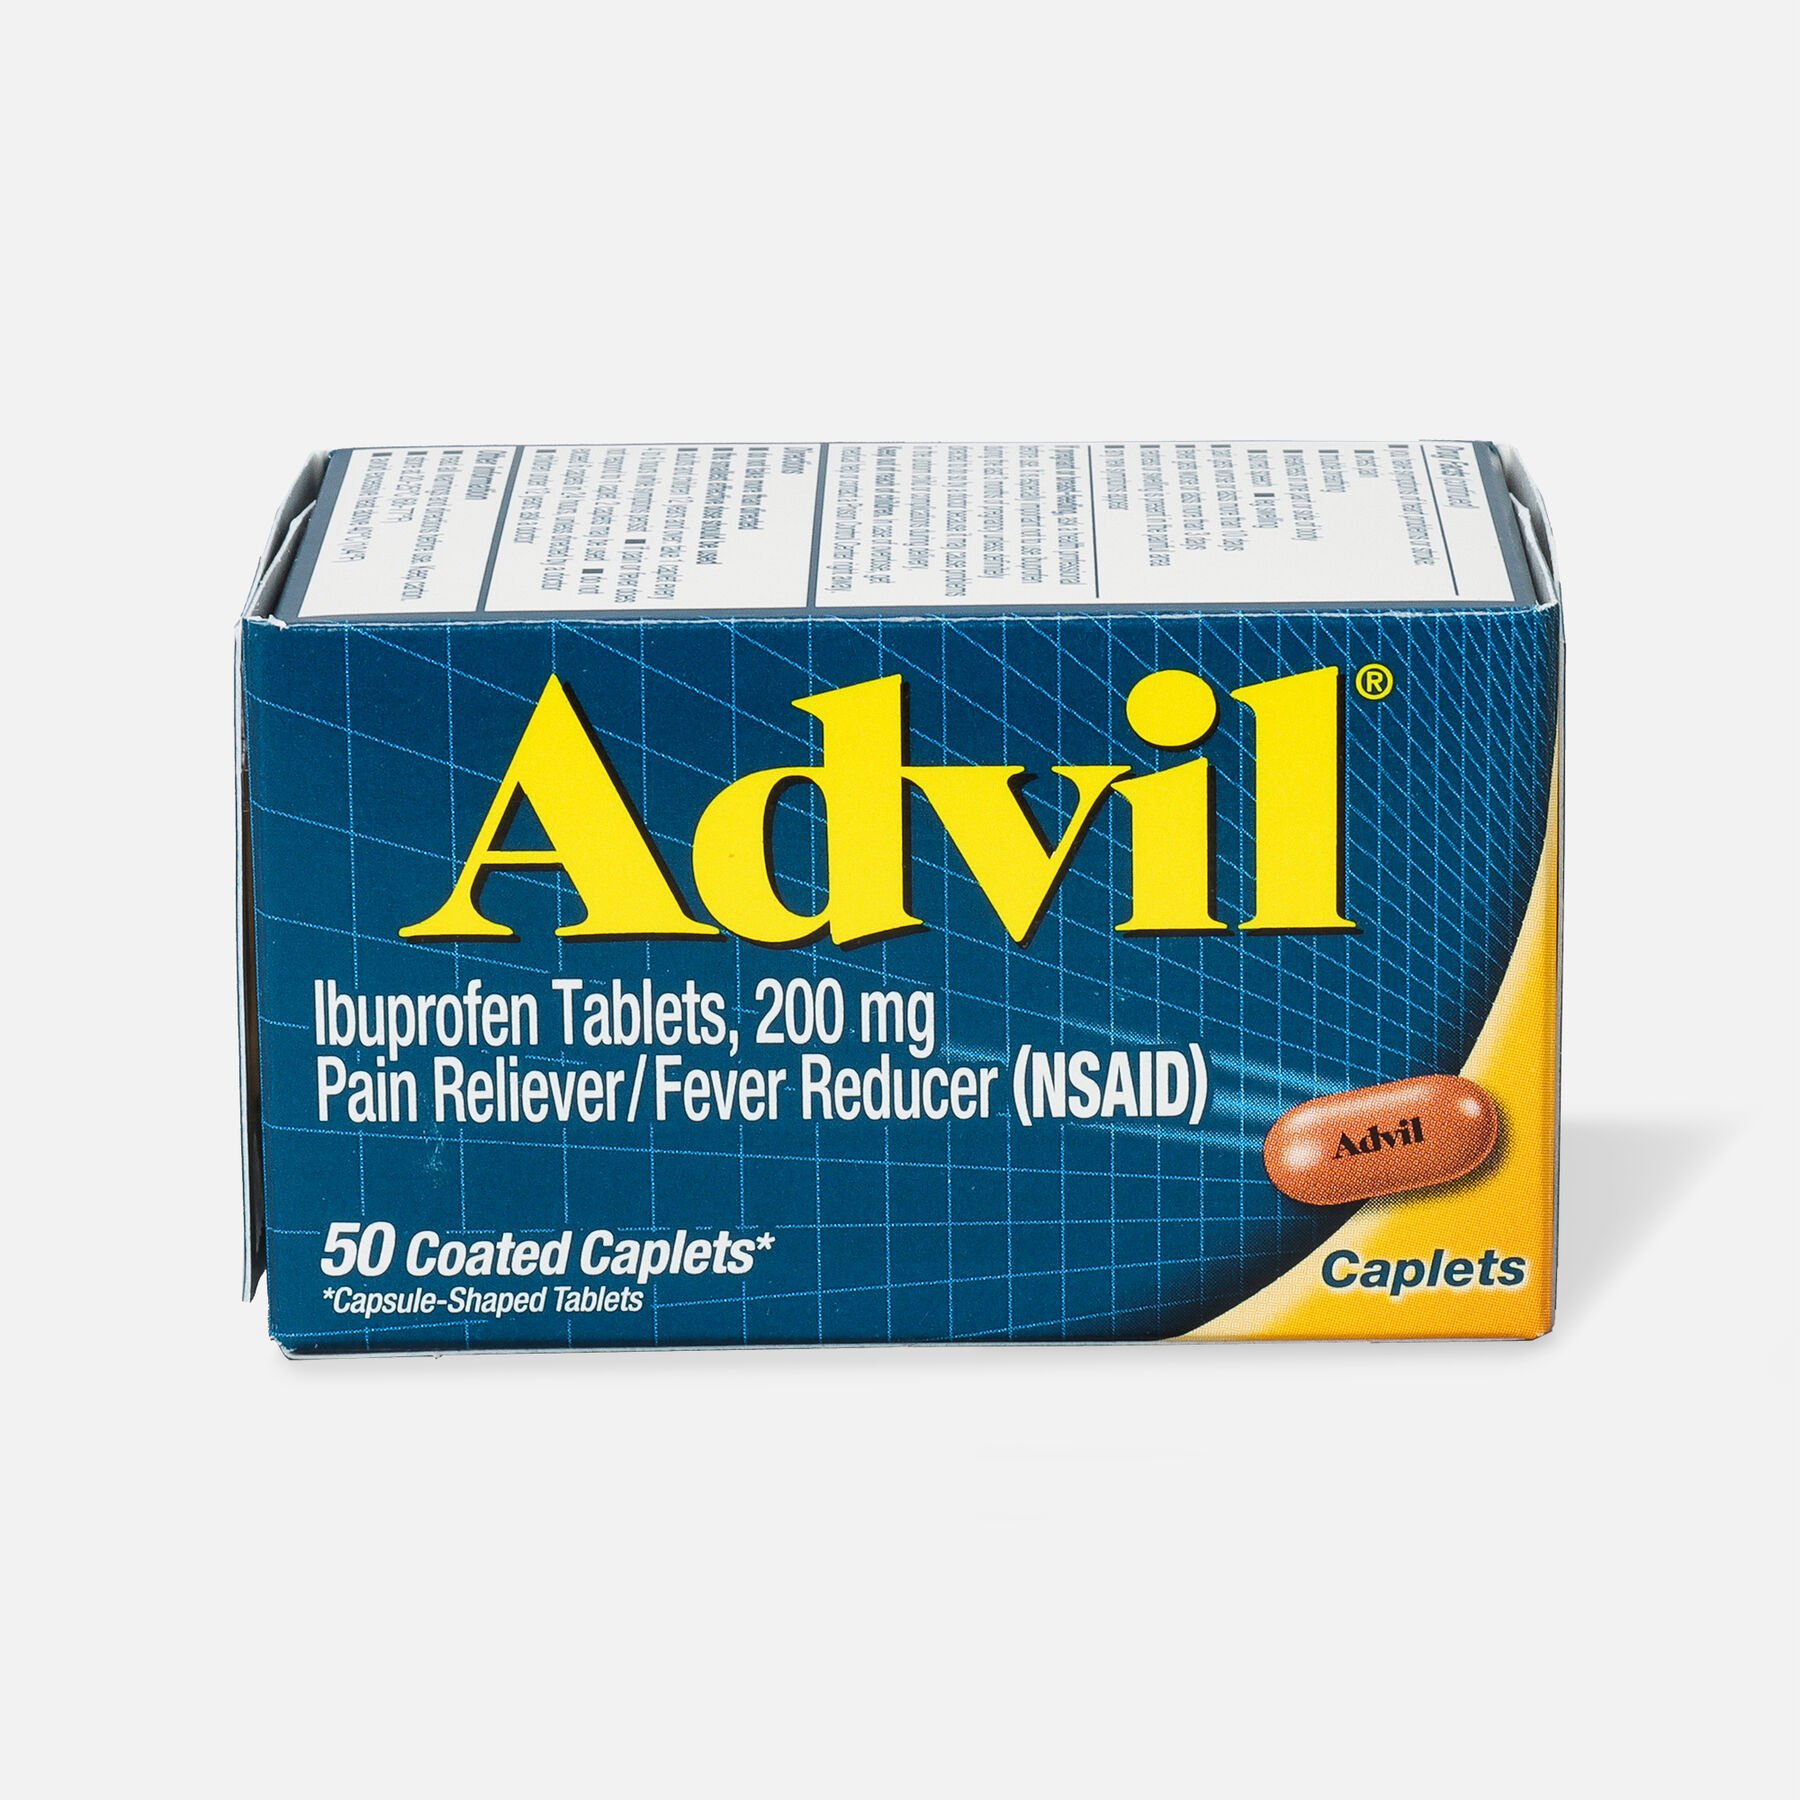 Advil Pain Reliever and Fever Reducer Coated Caplets, 200mg